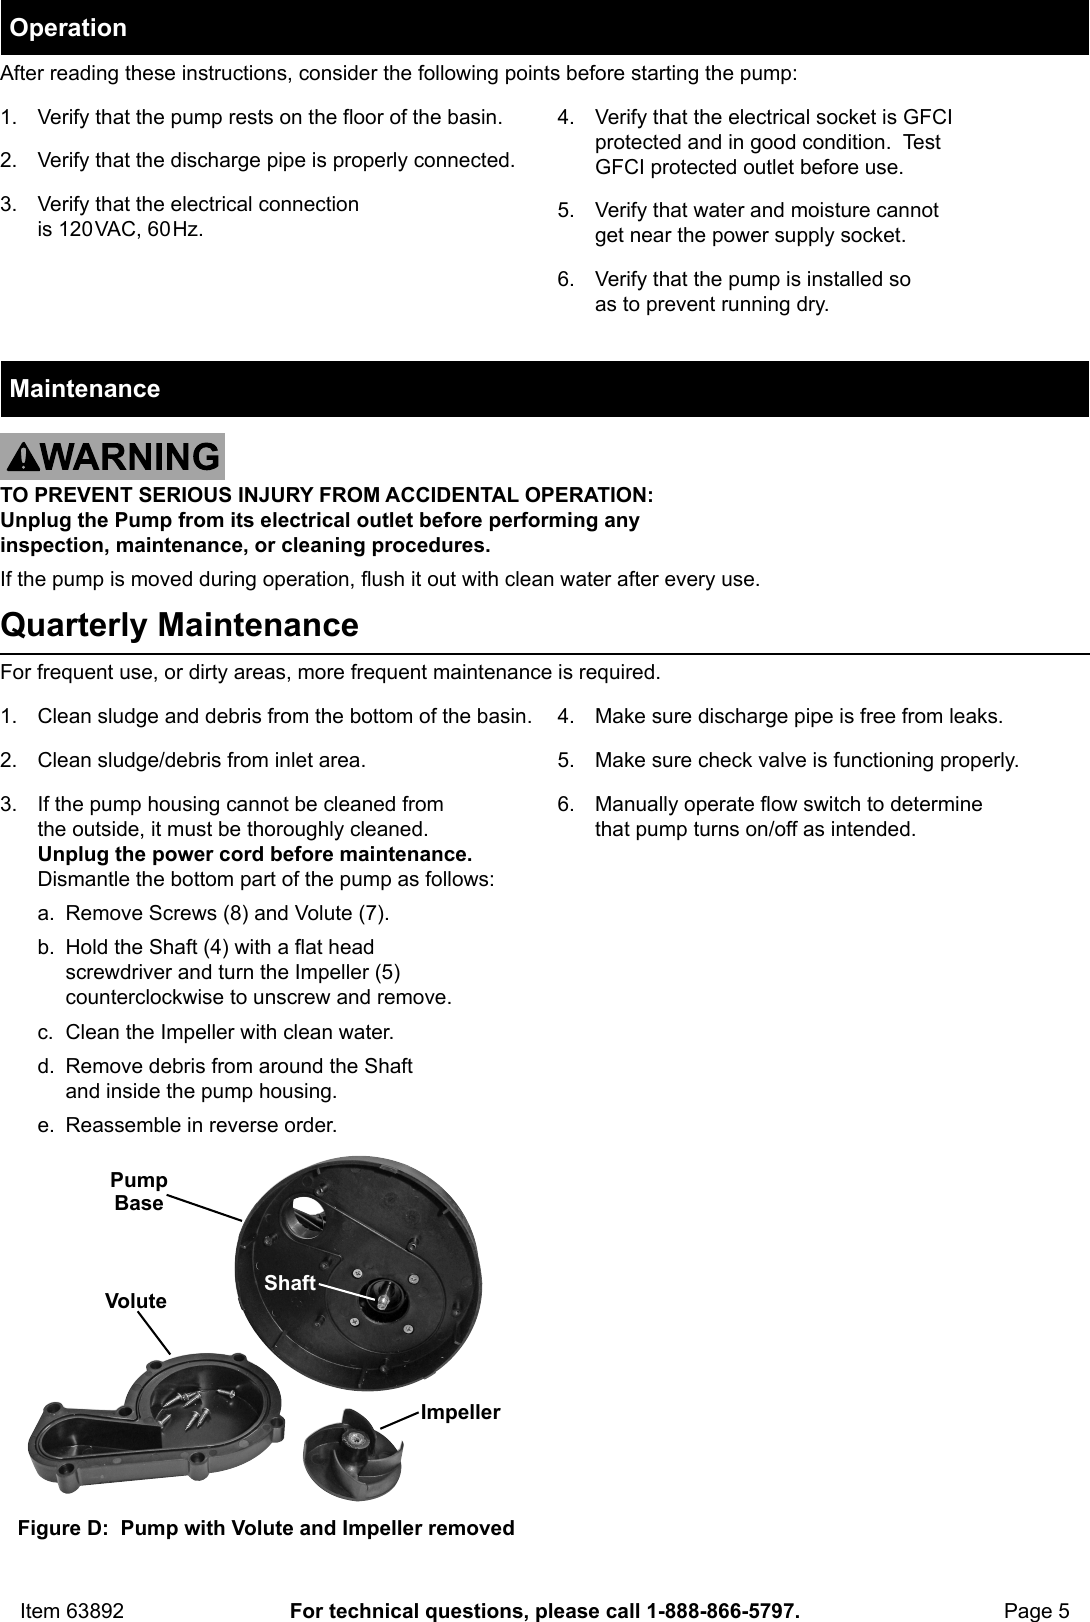 Page 5 of 8 - Manual For The 63892 1/4 HP Submersible Sump Pump 3000 GPH